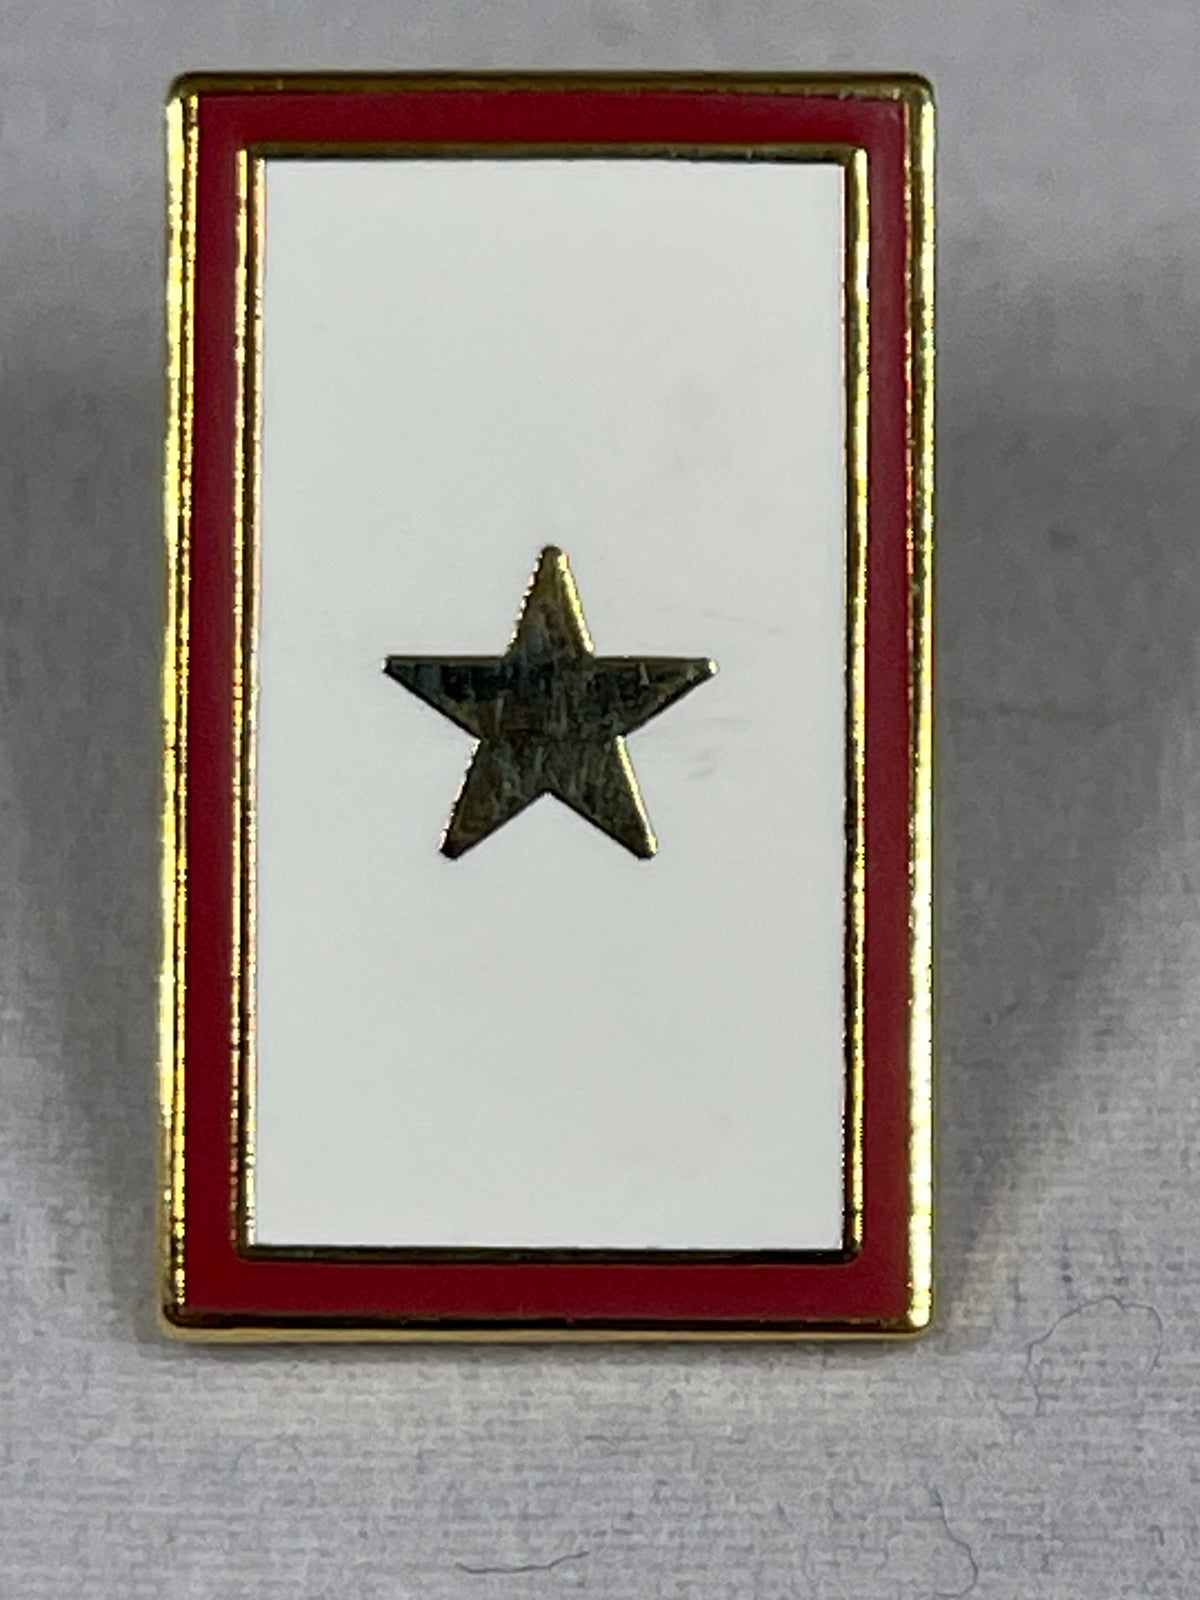 Gold Star Family Member Killed in Action Pin